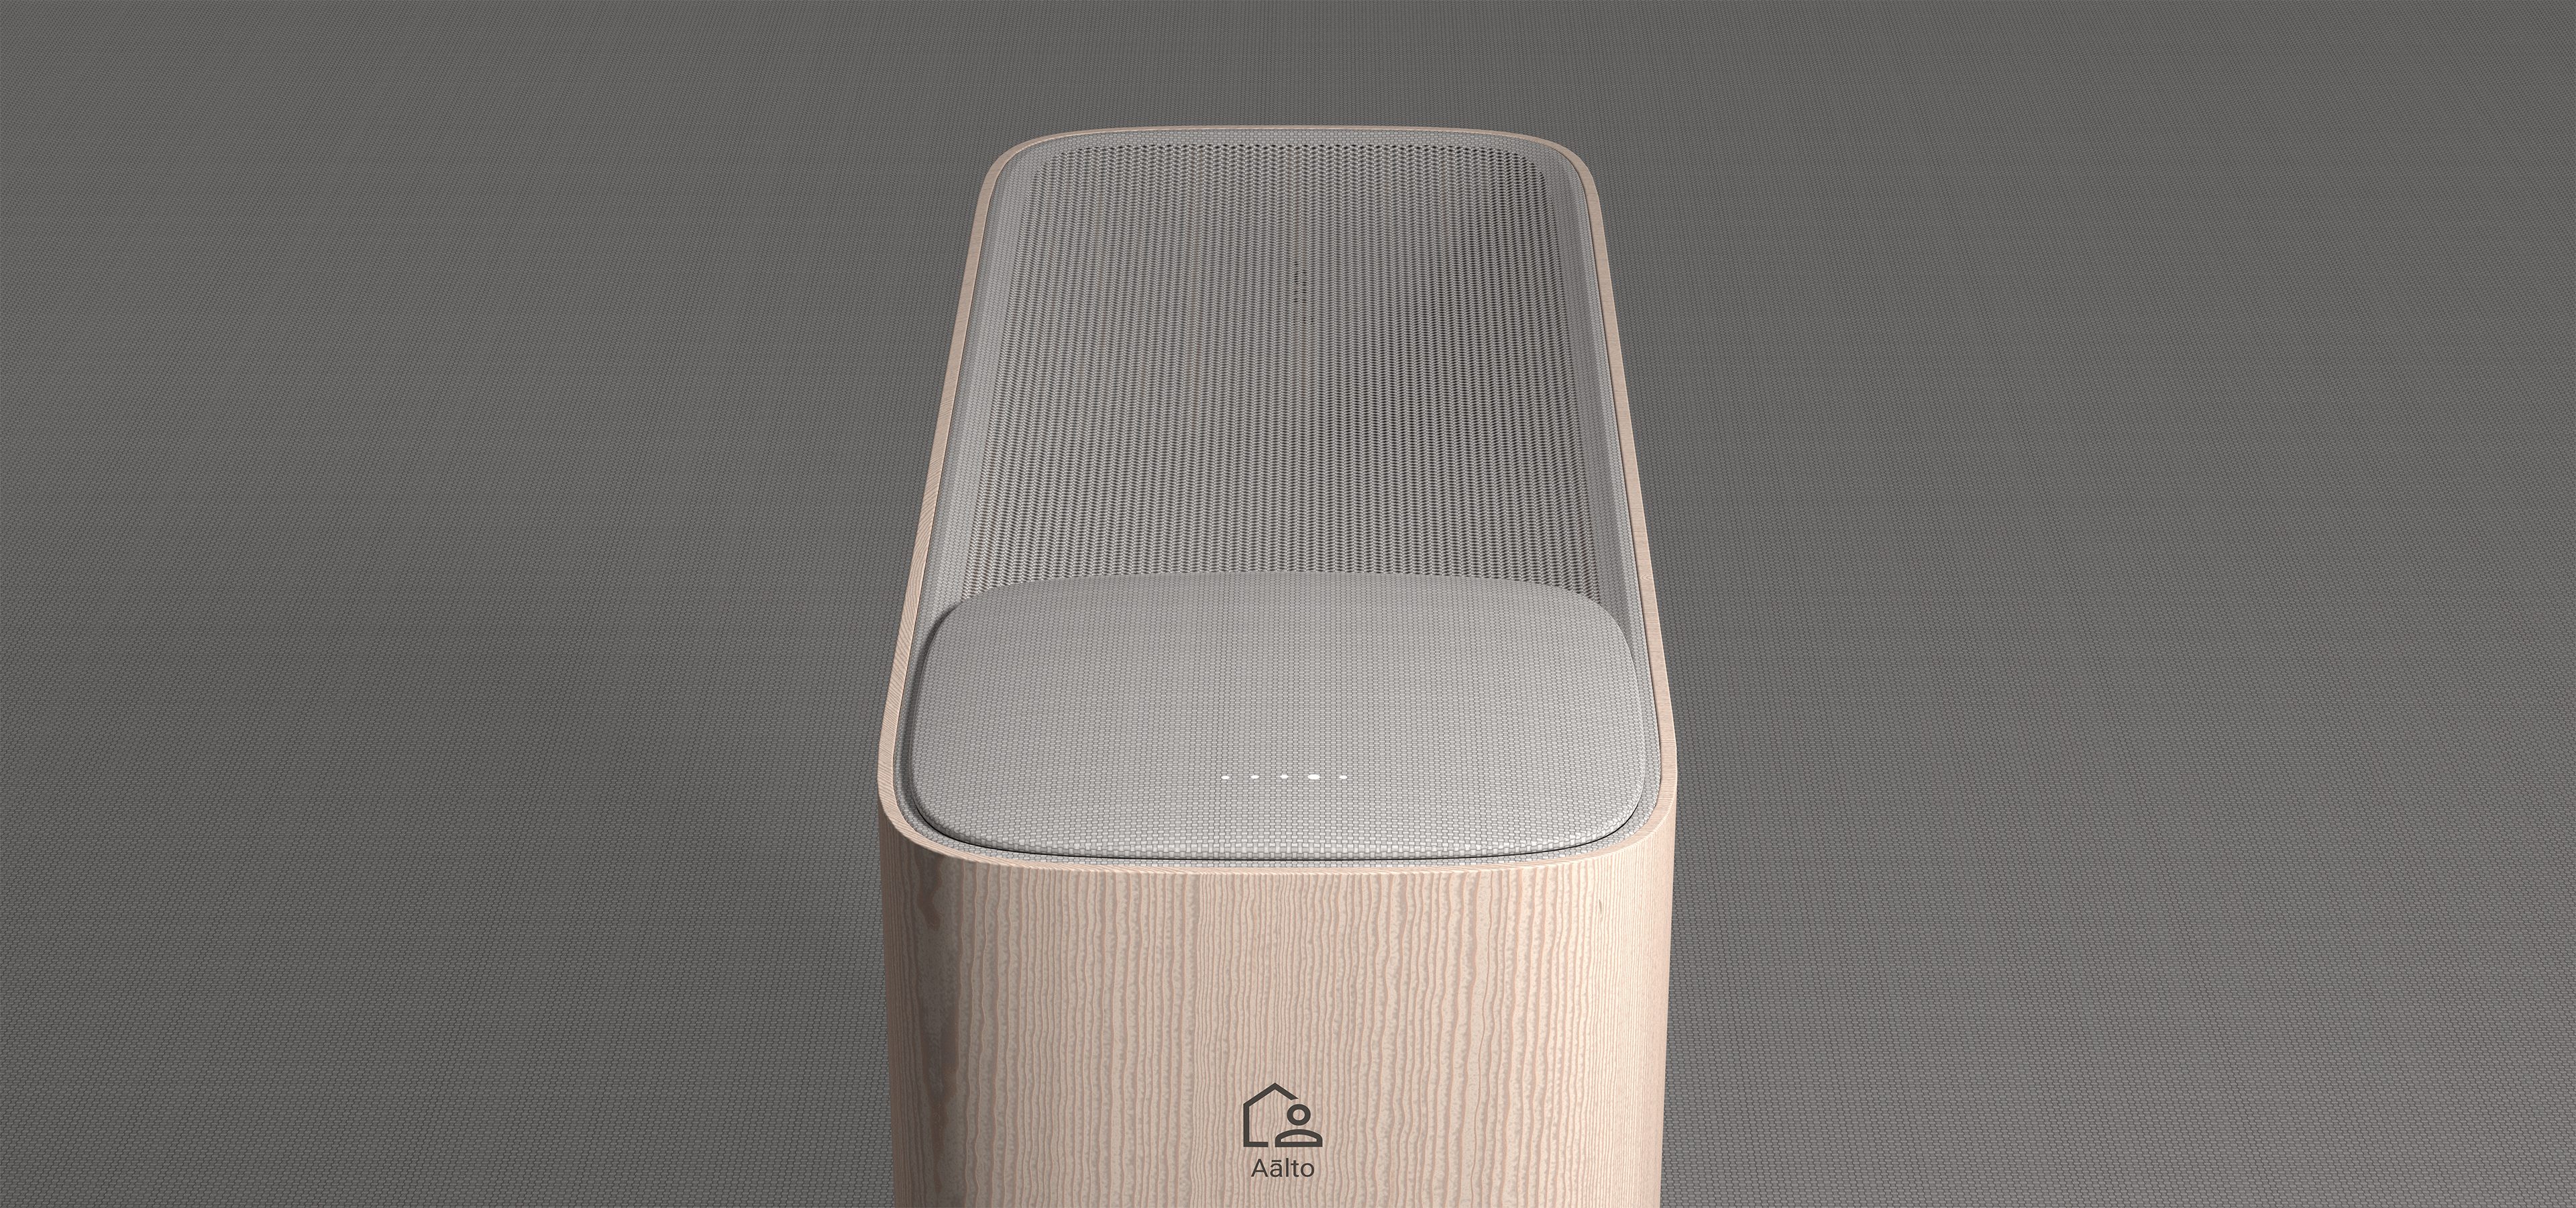 Aalto air purifier. Front view render showing a blond wood body and delicate grey textile top surface.